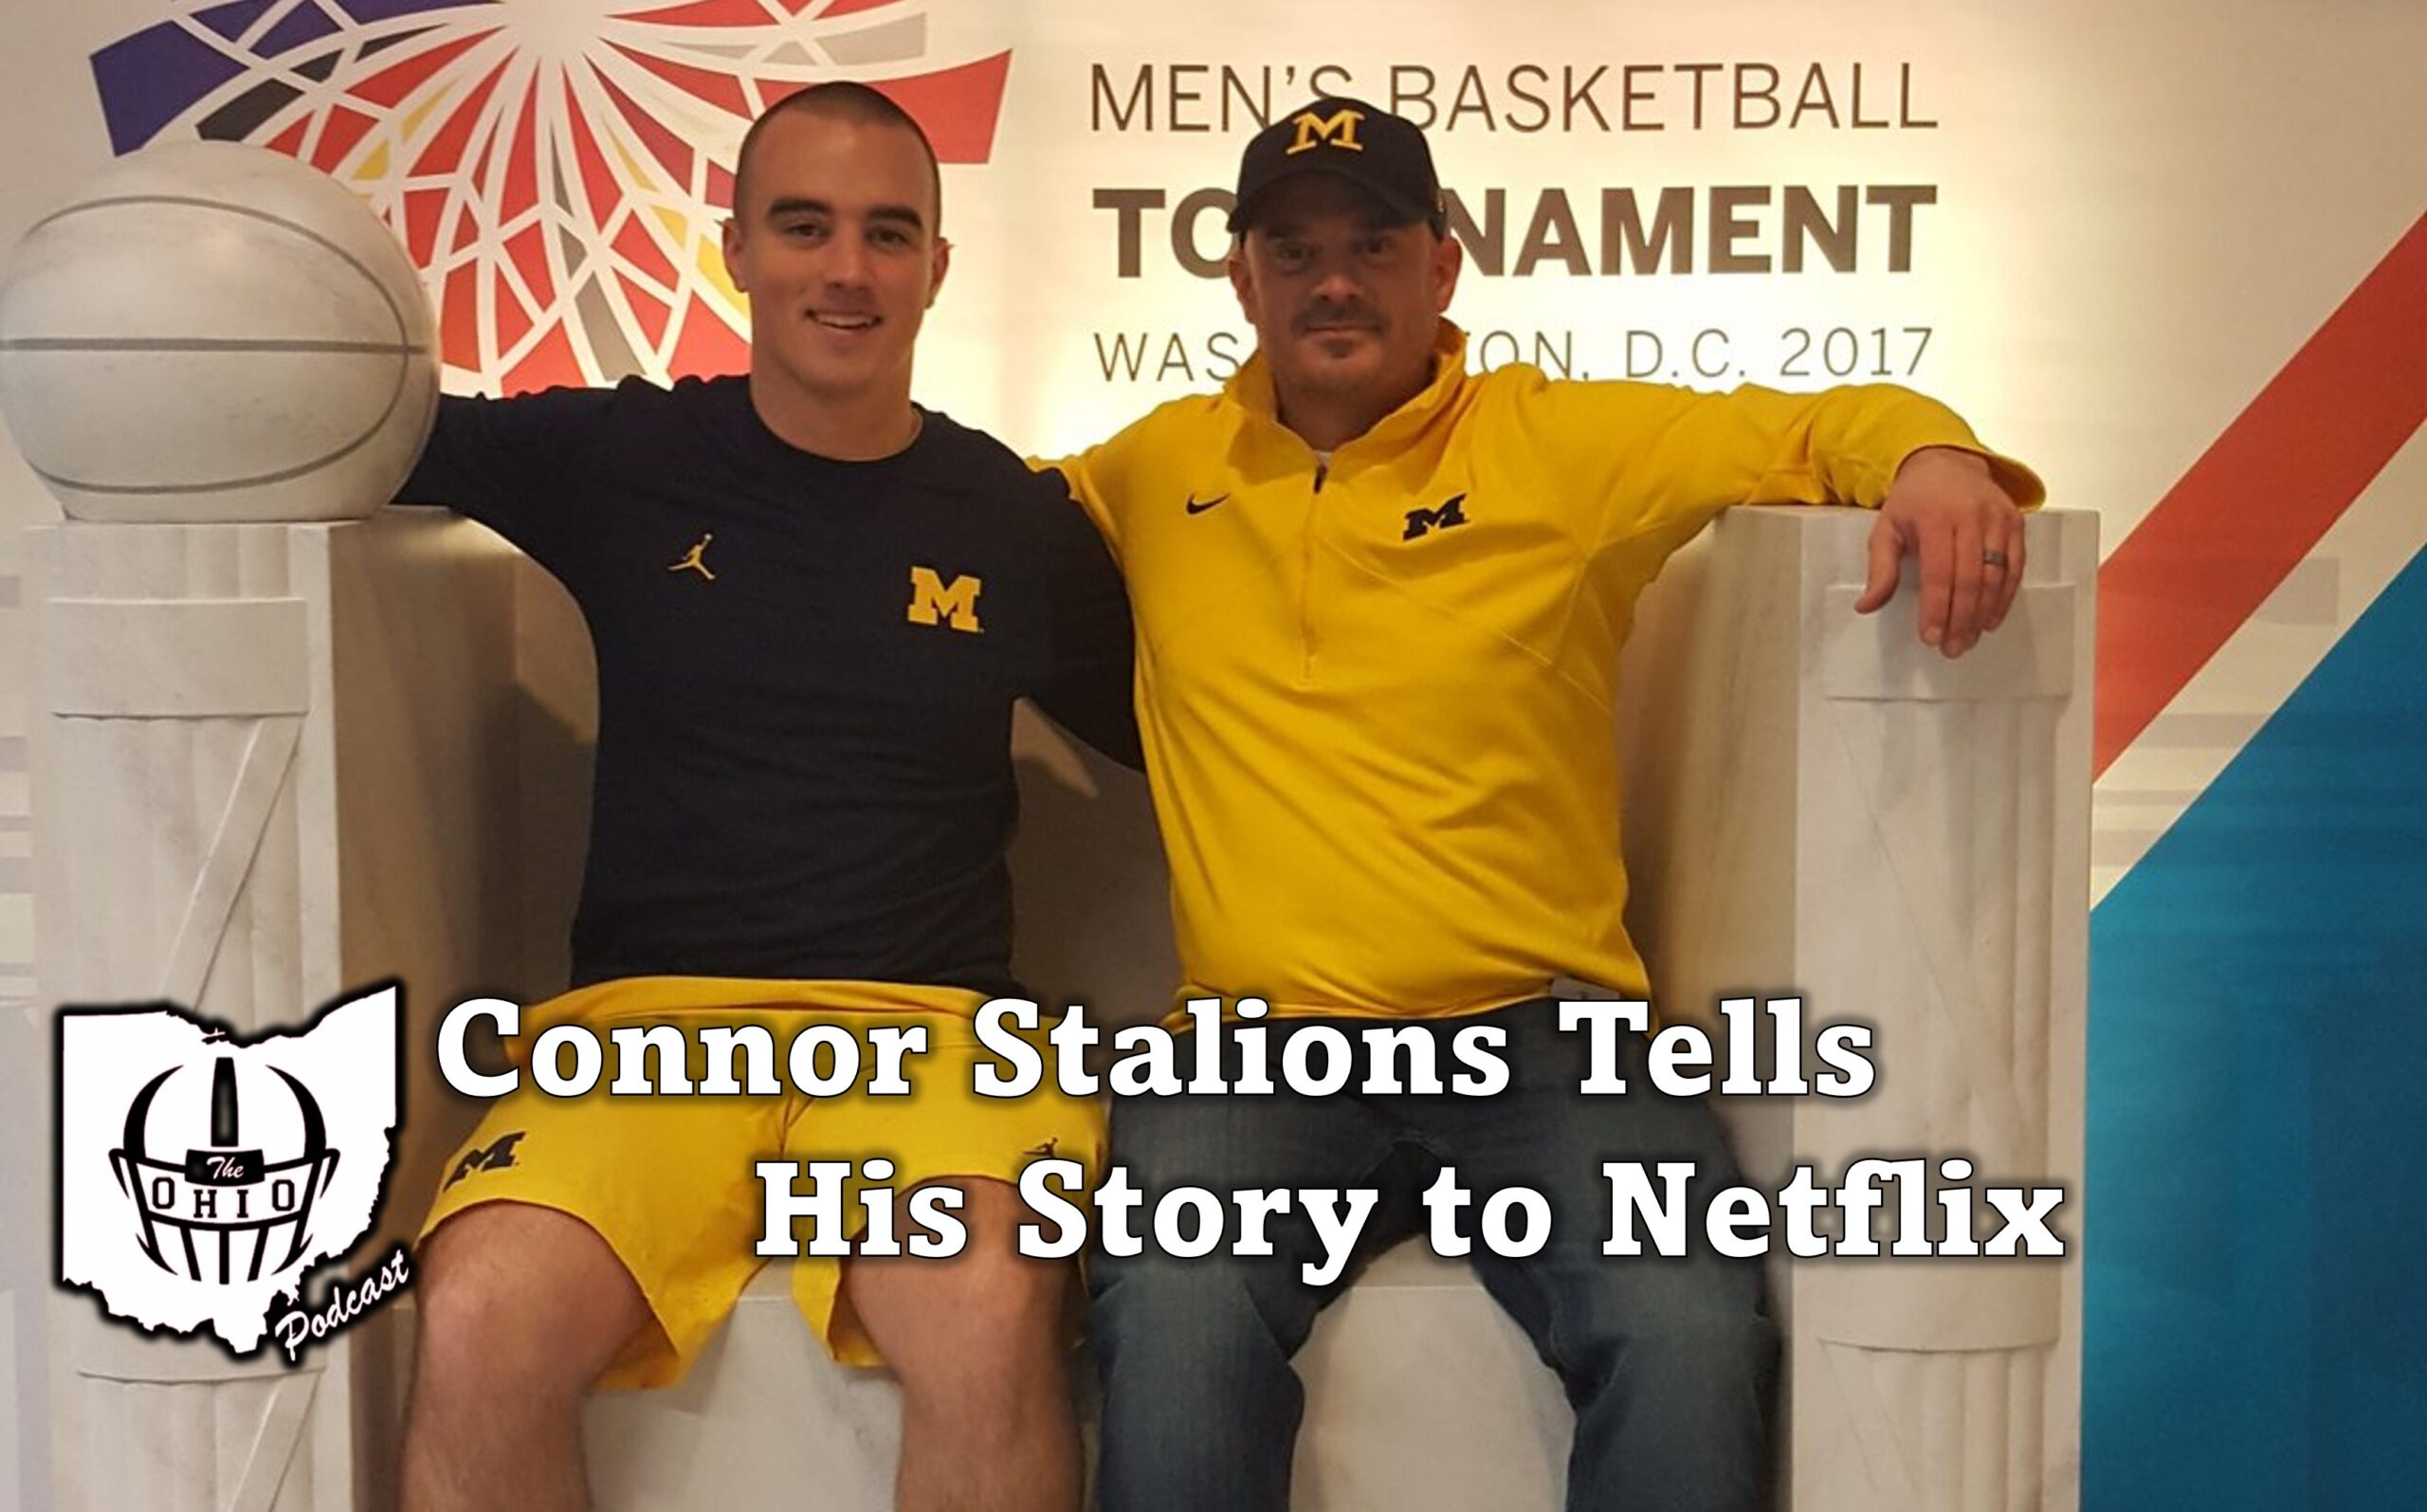 Connor Stalions Tells His Story to Netflix.